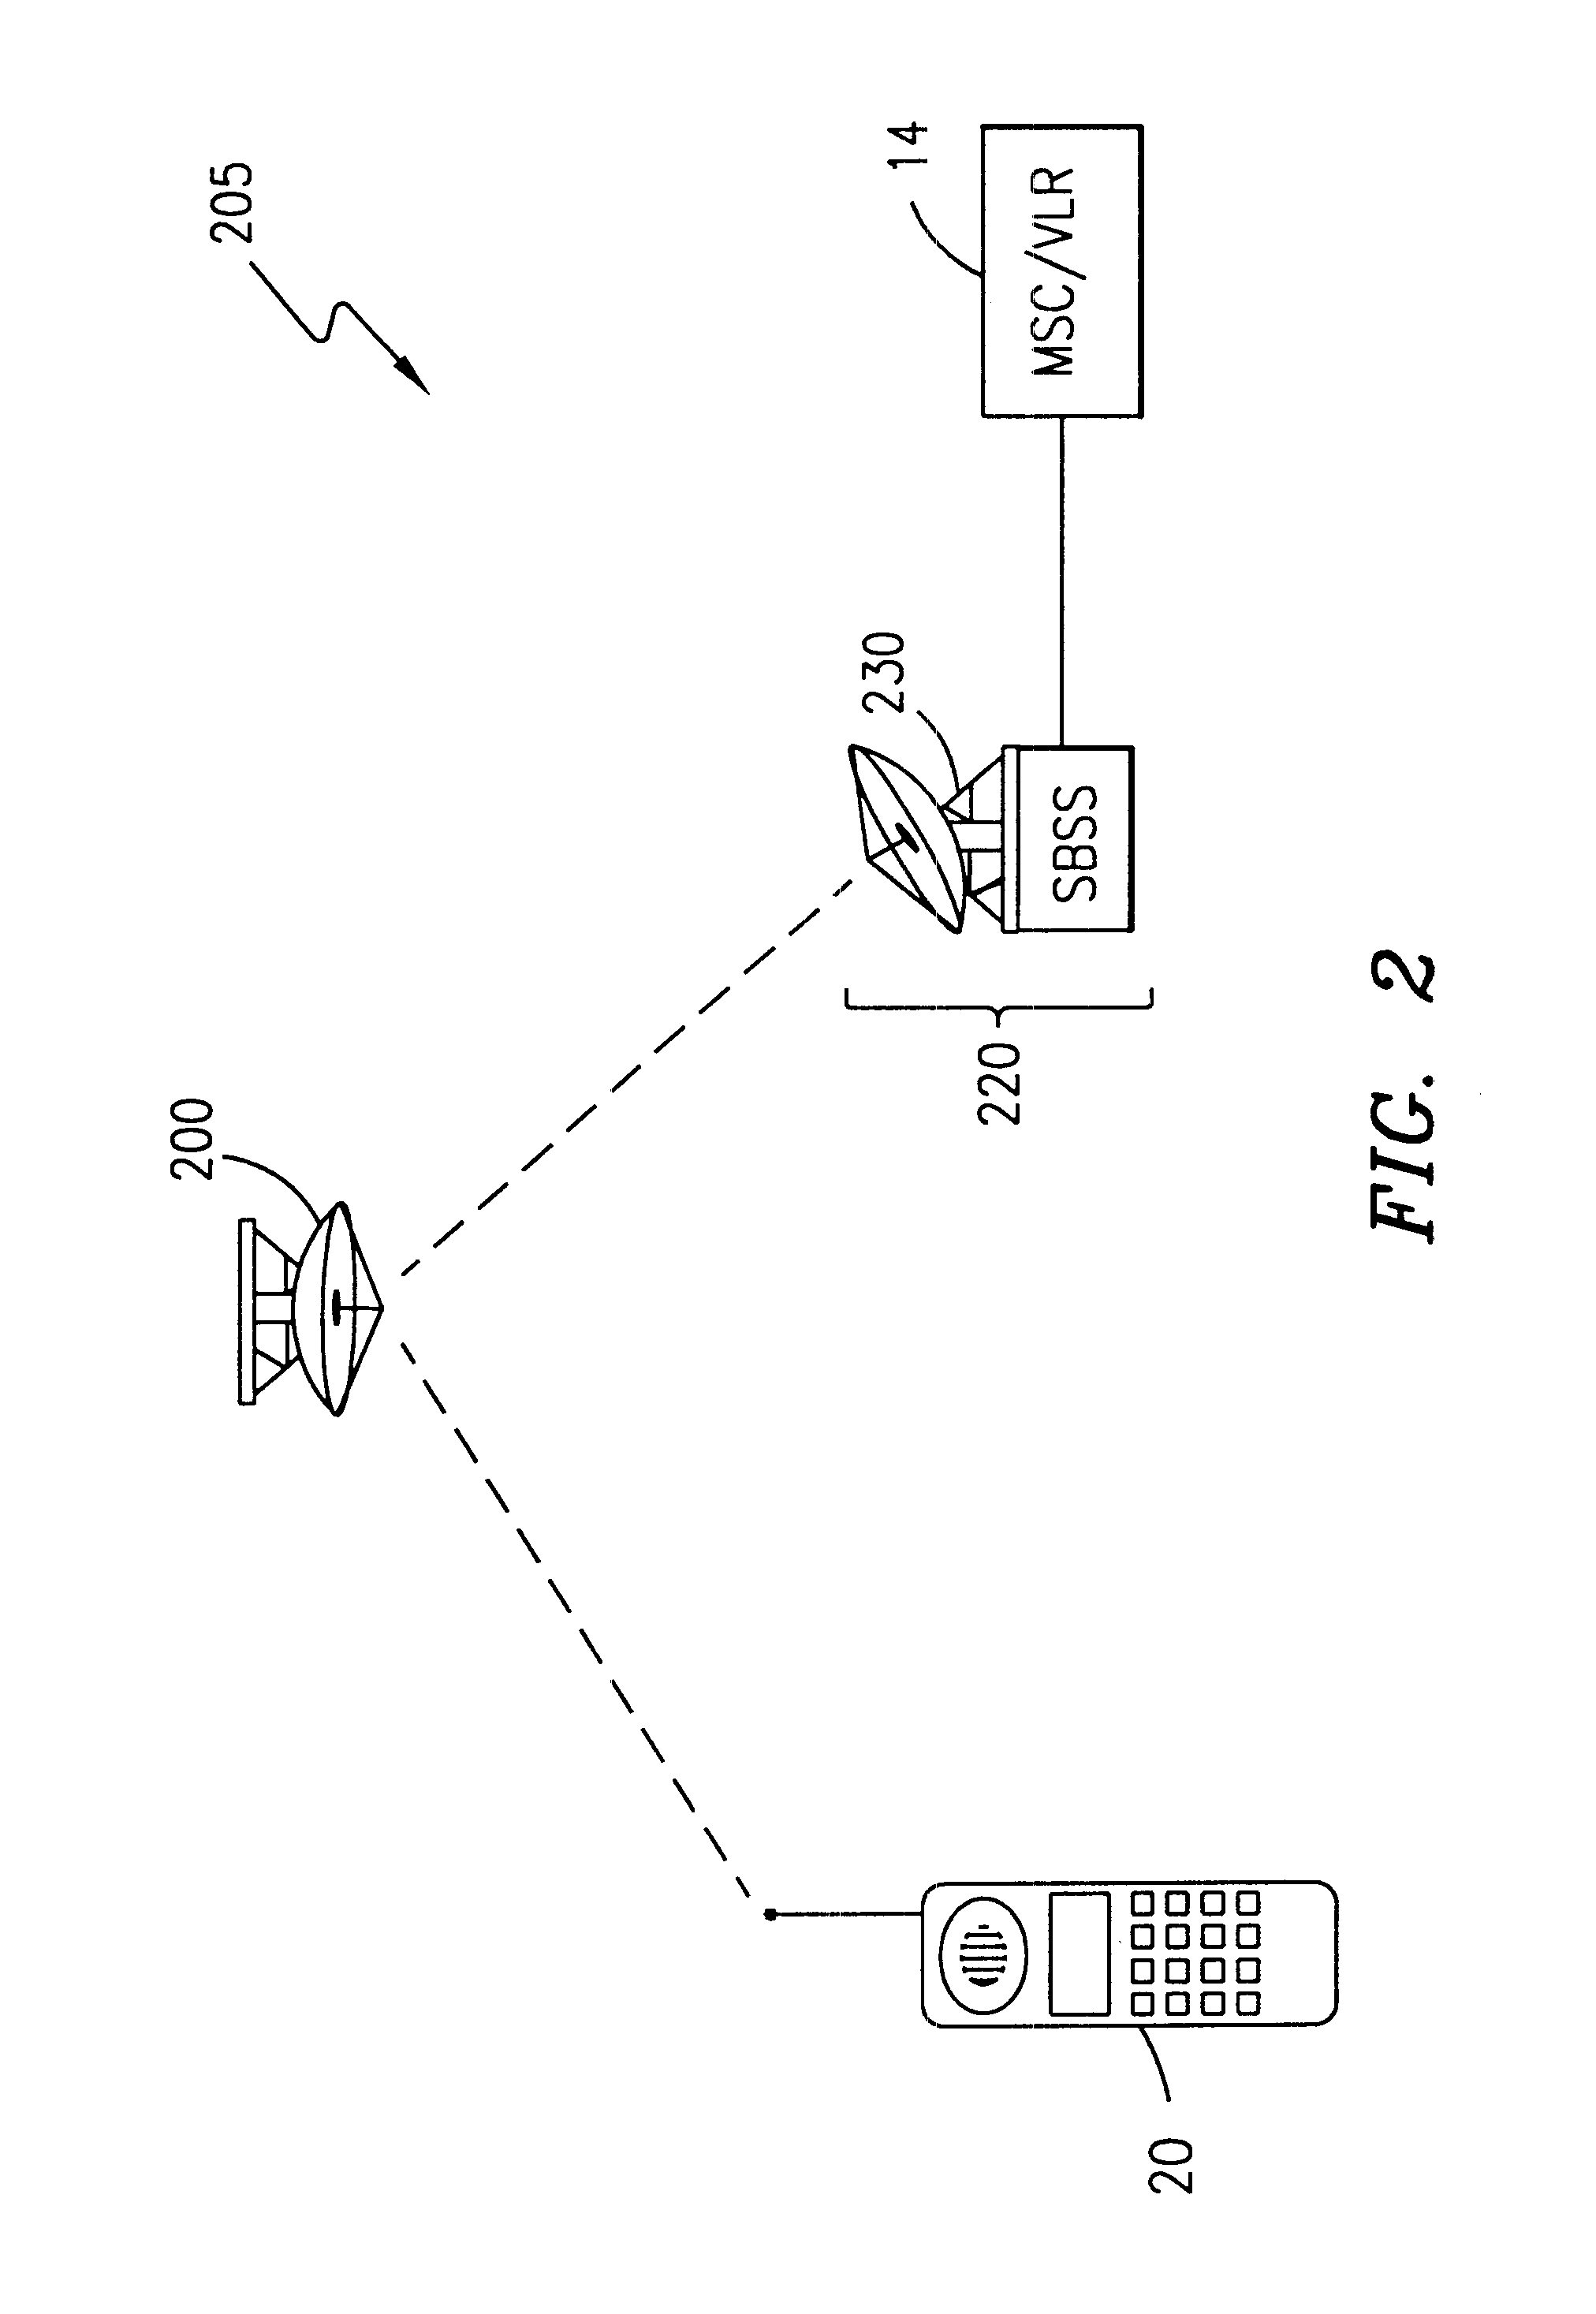 System and method for modification of satellite hop counter to reflect orbit type